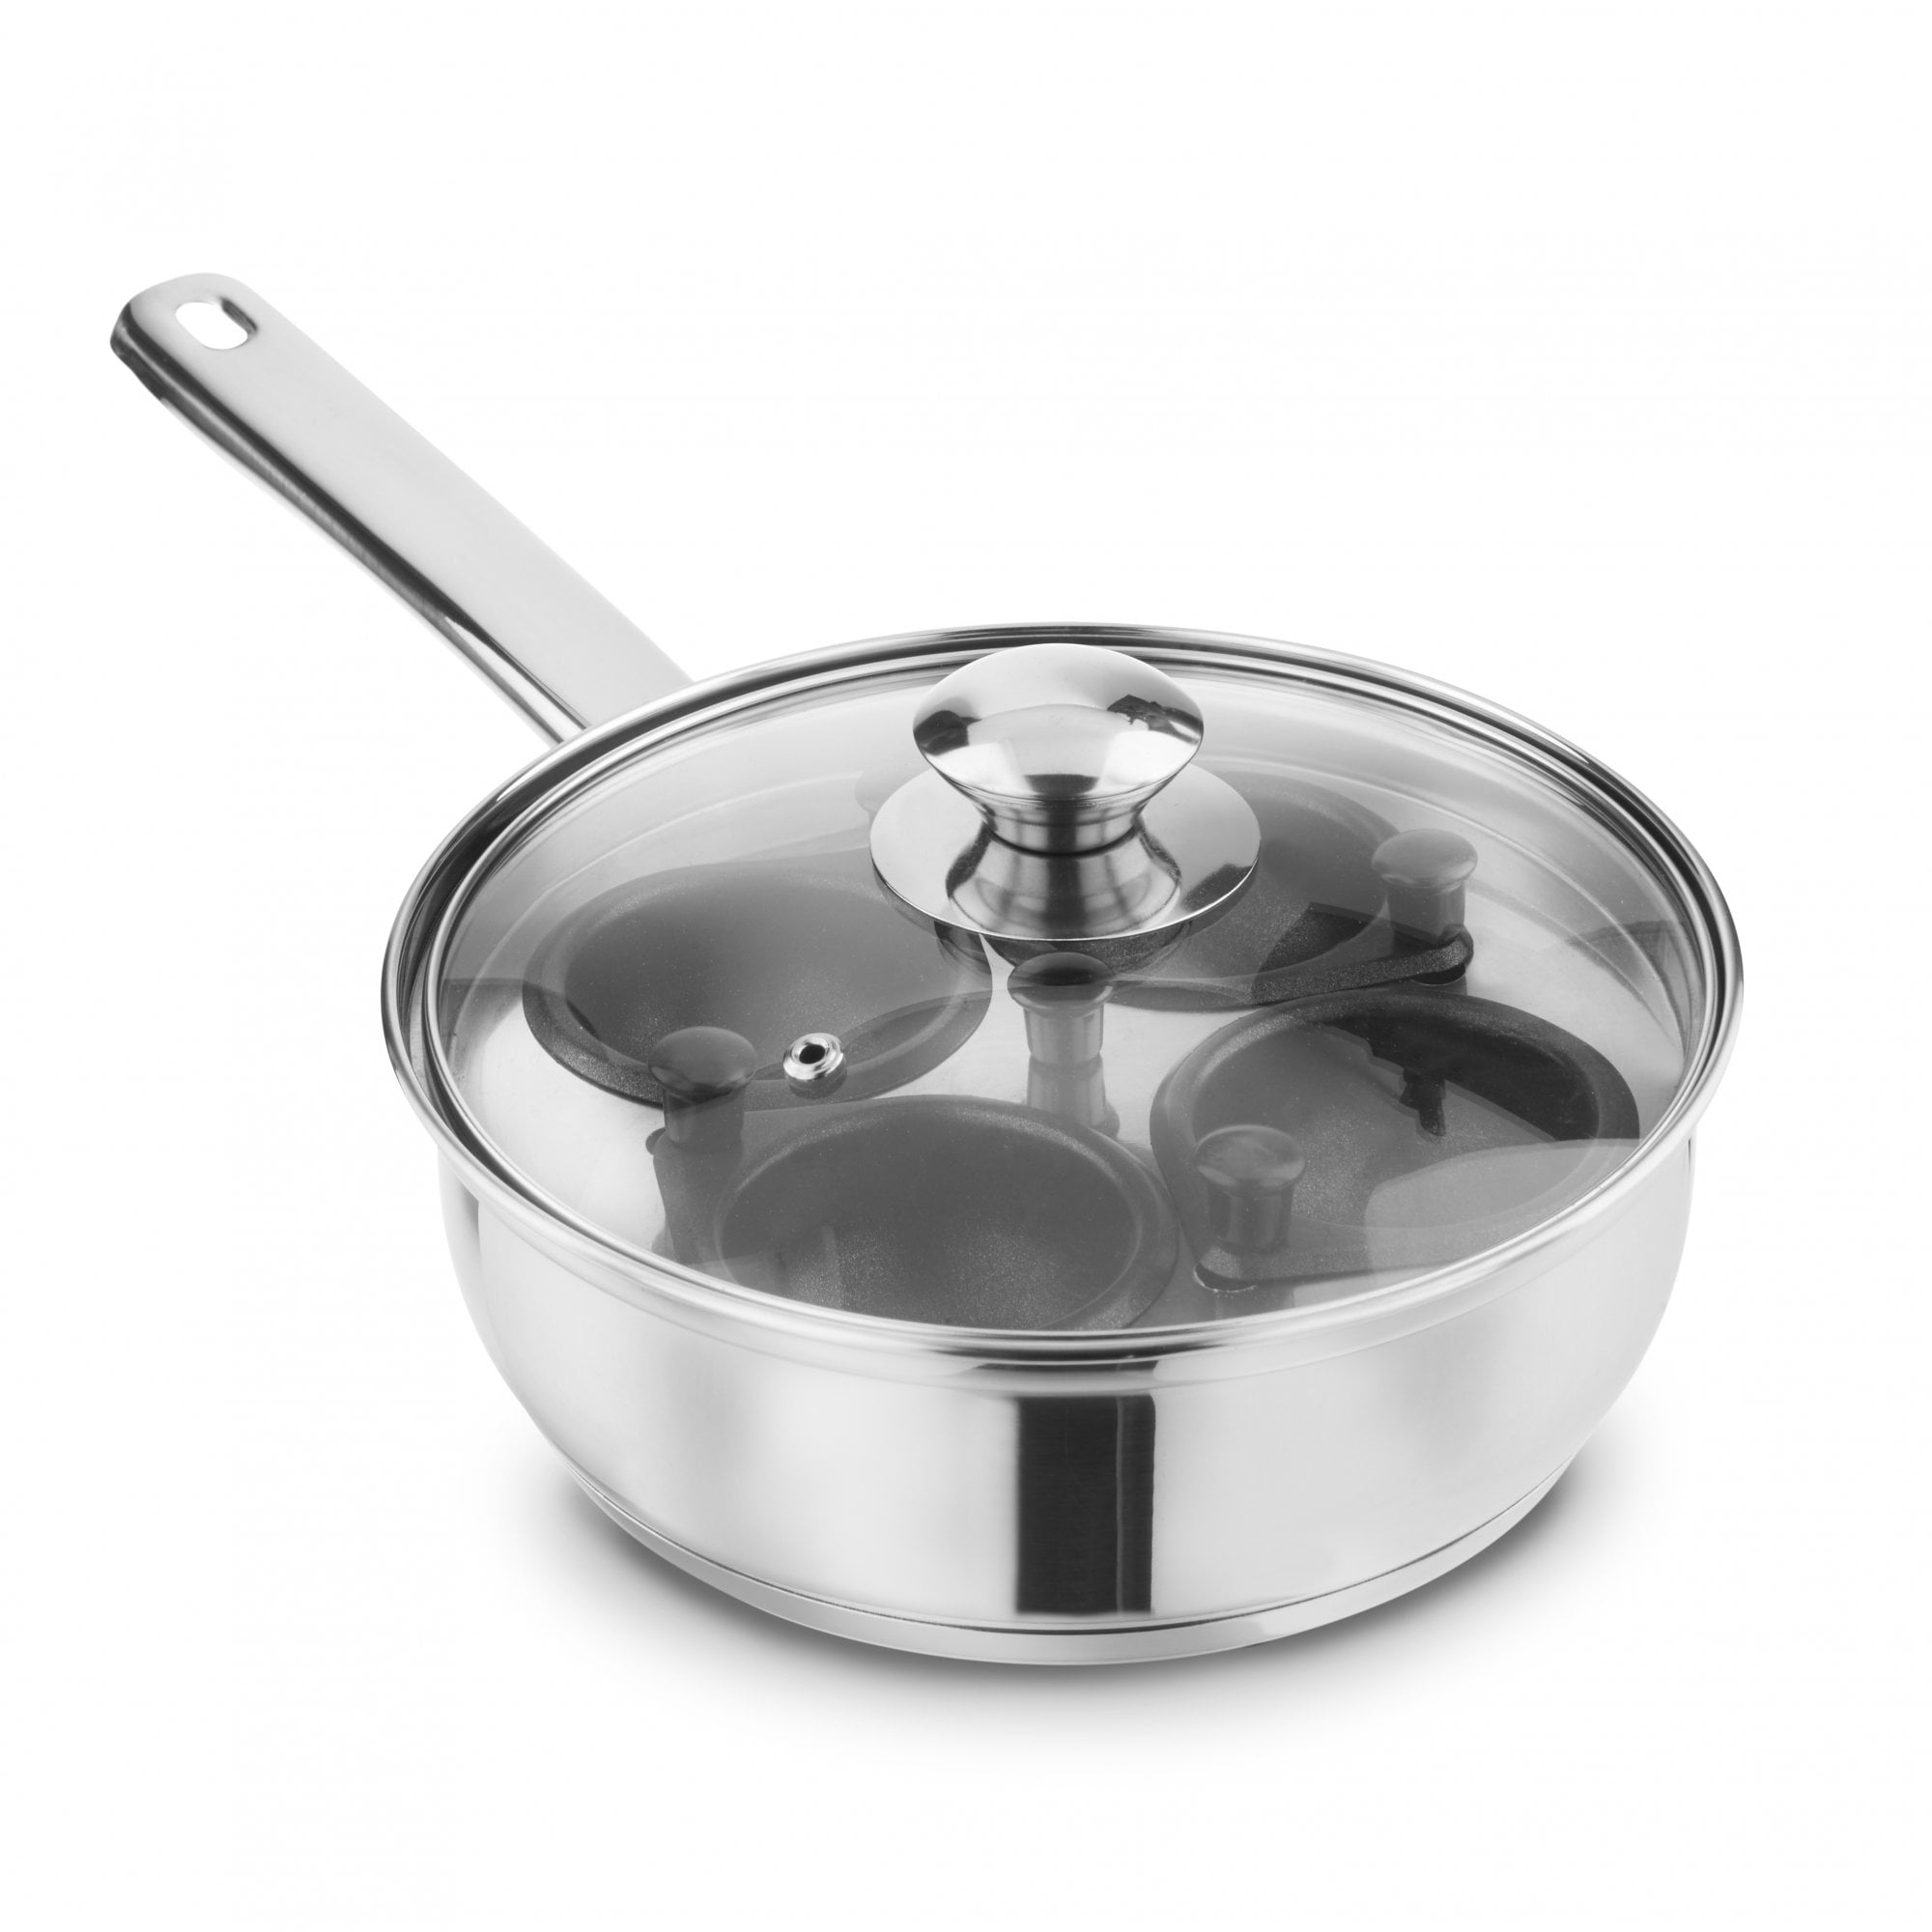 Lewis’s Stainless Steel Egg Poacher Pan with Lid 20cm - Silver  | TJ Hughes